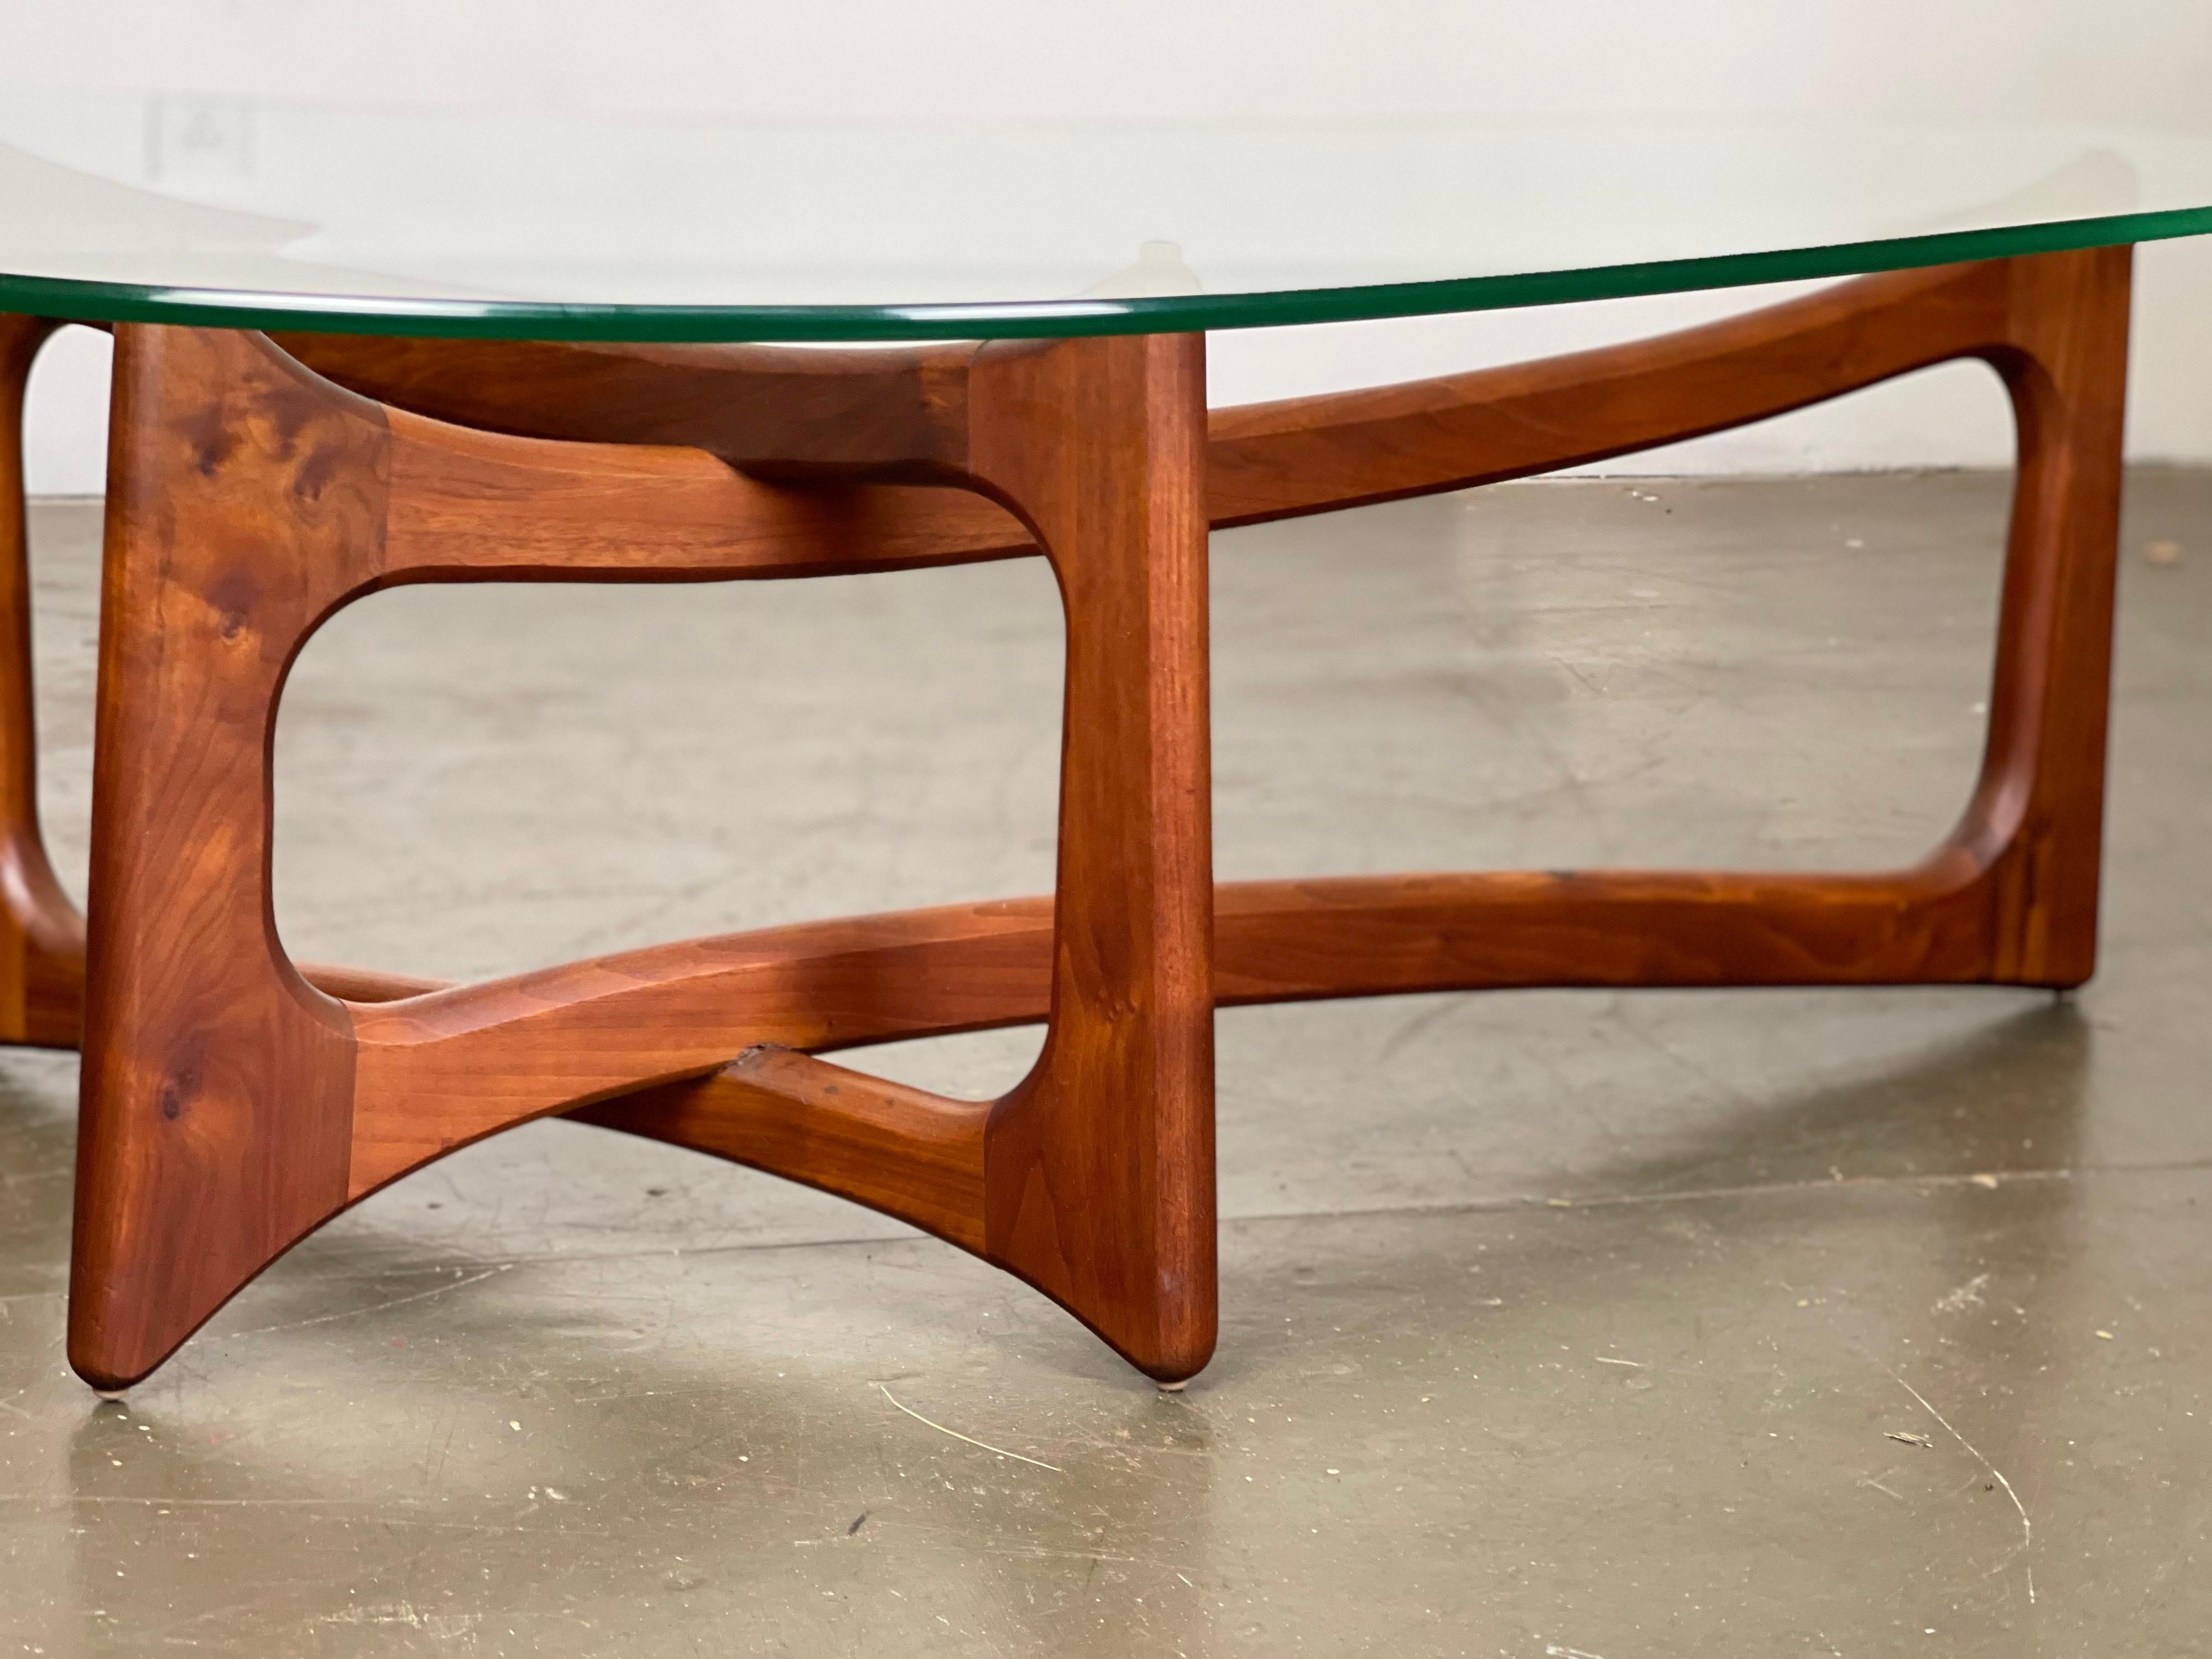 Mid-20th Century Adrian Pearsall Ribbon Coffee Table in Walnut and Glass for Craft Associates 